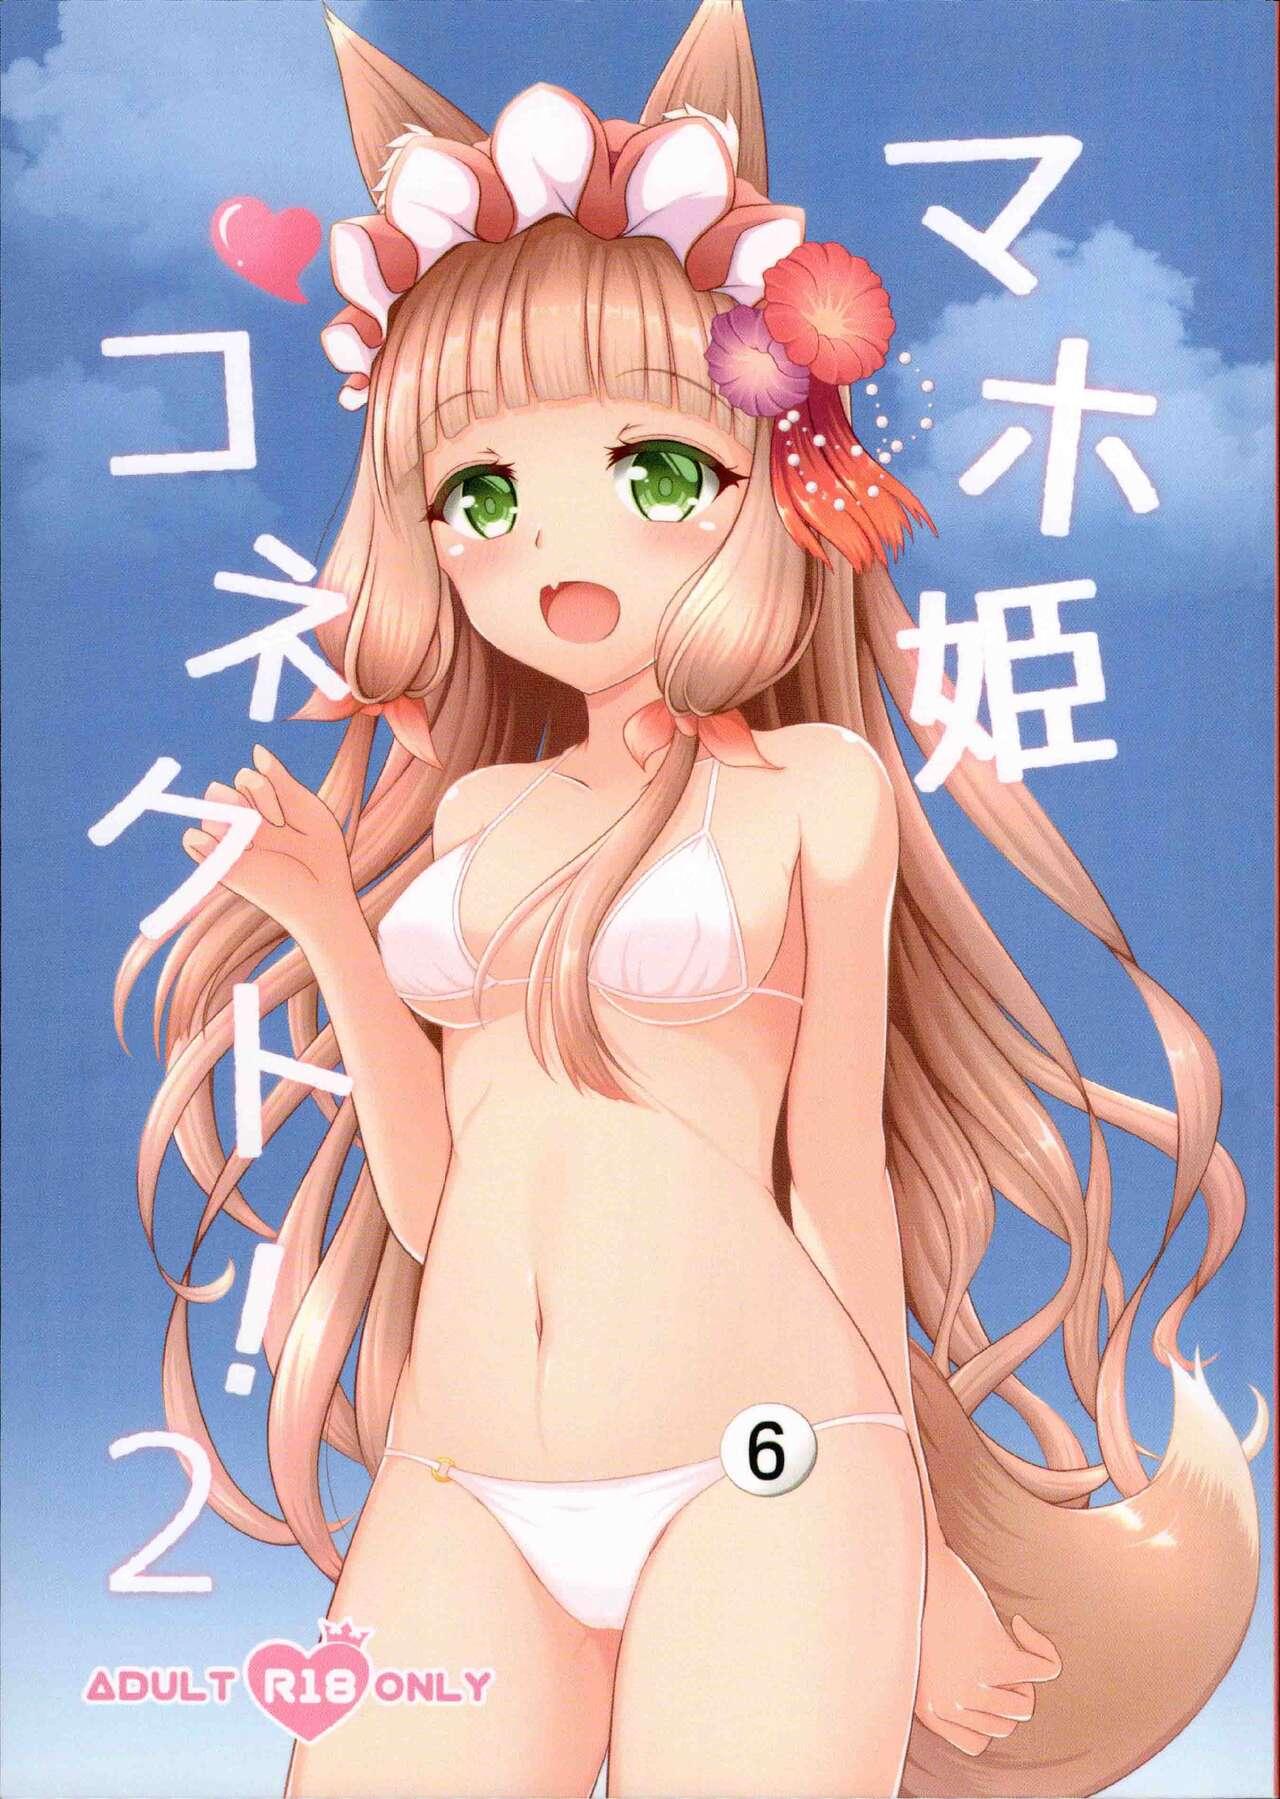 Nude Maho Hime Connect! 2 - Princess connect 1080p - Picture 1